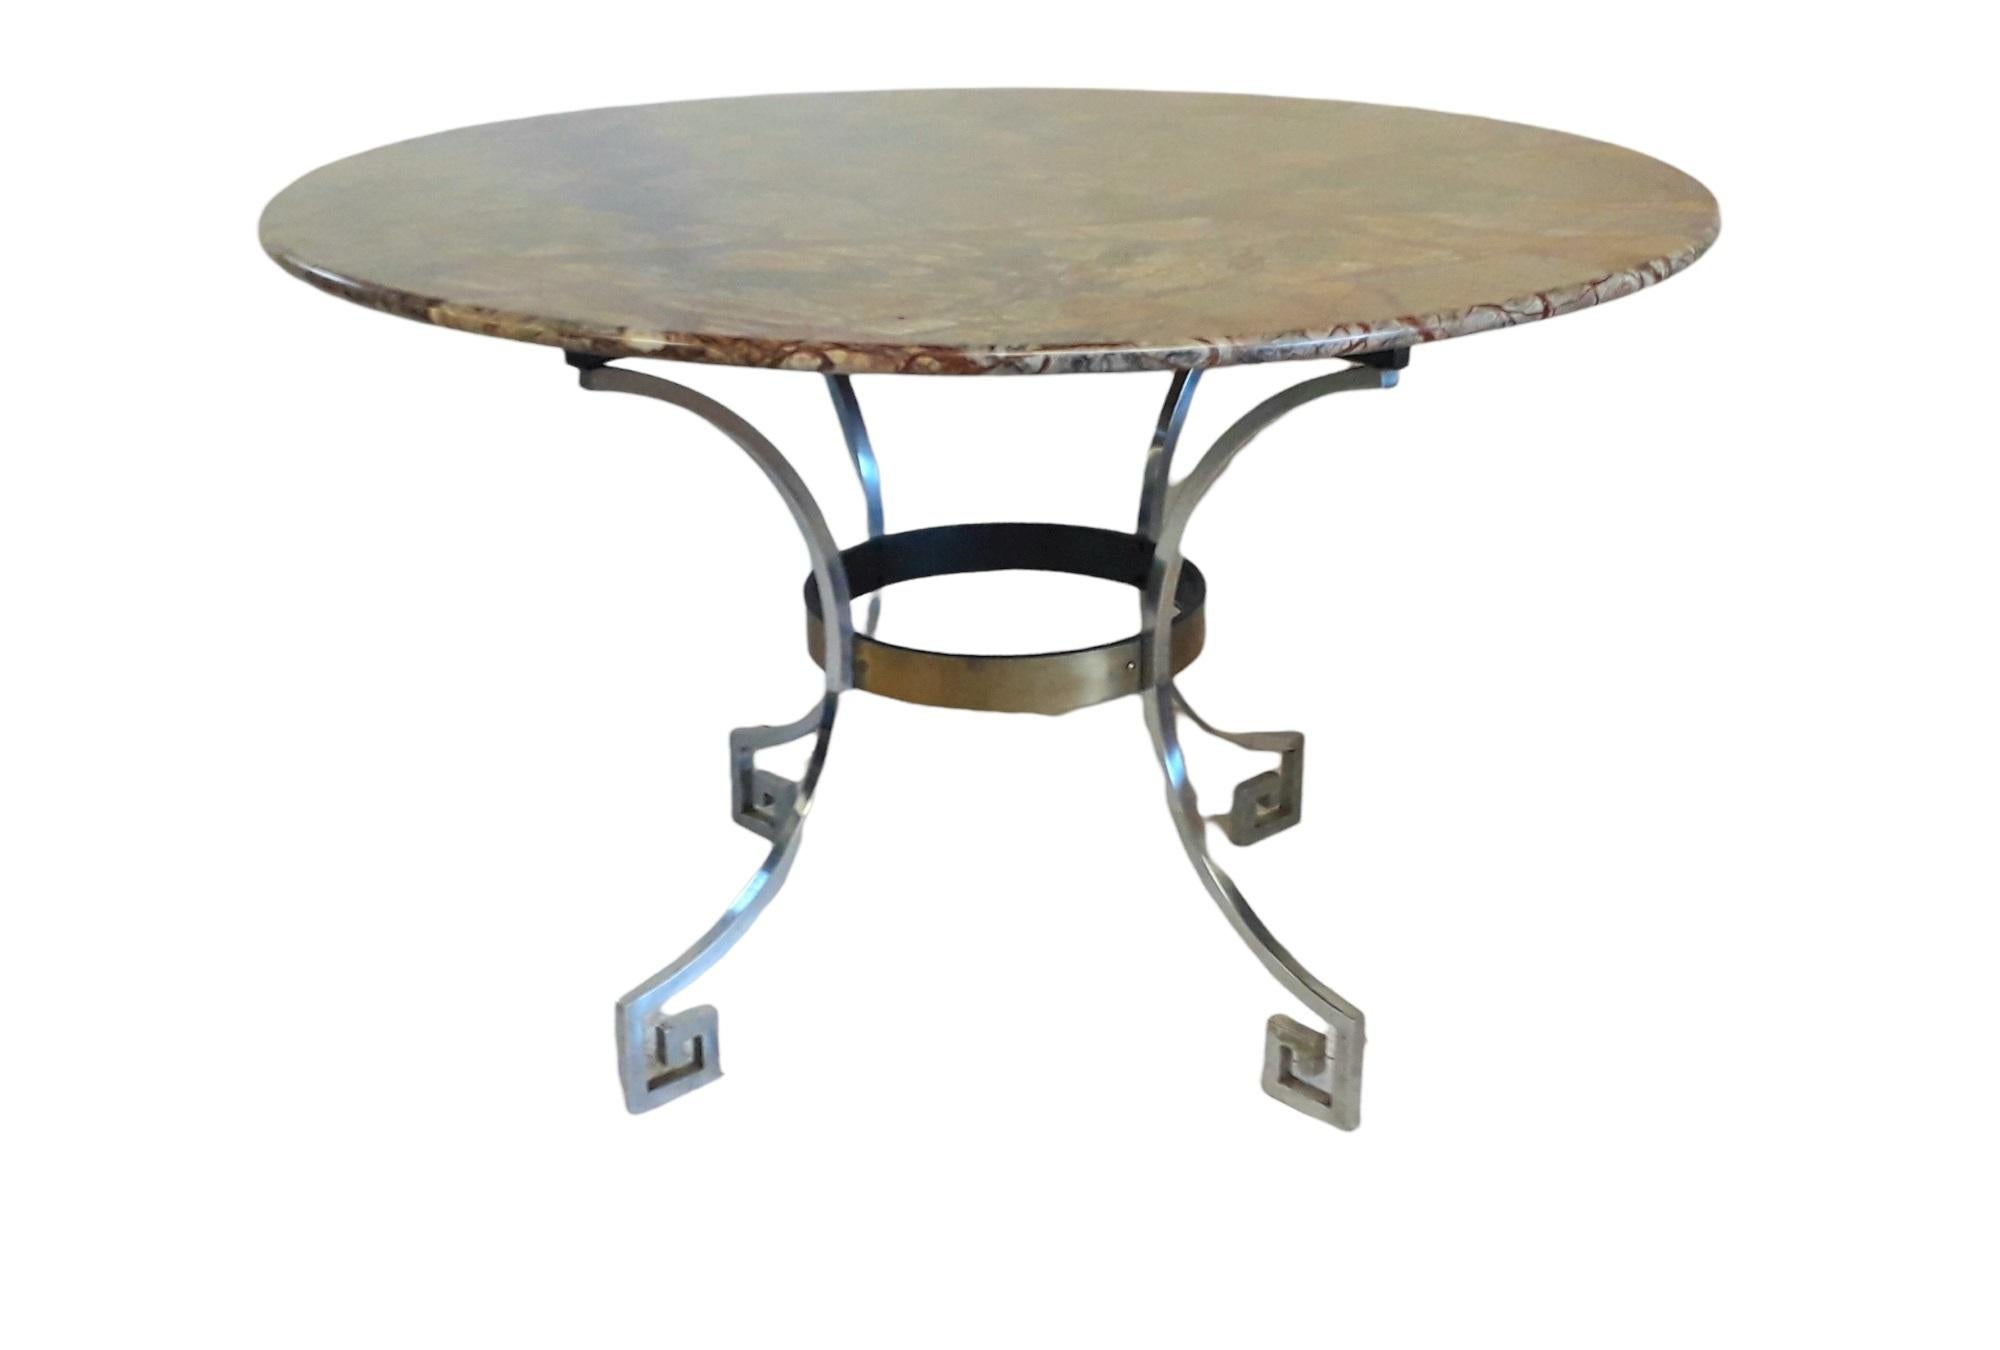 Marble Center Circular Dining Table.

1970s Chrome and Marble circular table with Greek key swept in leg design set with a joining brass band support.

Marble type is Rainforest Brown:
Rainforest Brown Marble is an extraordinary stone comprising